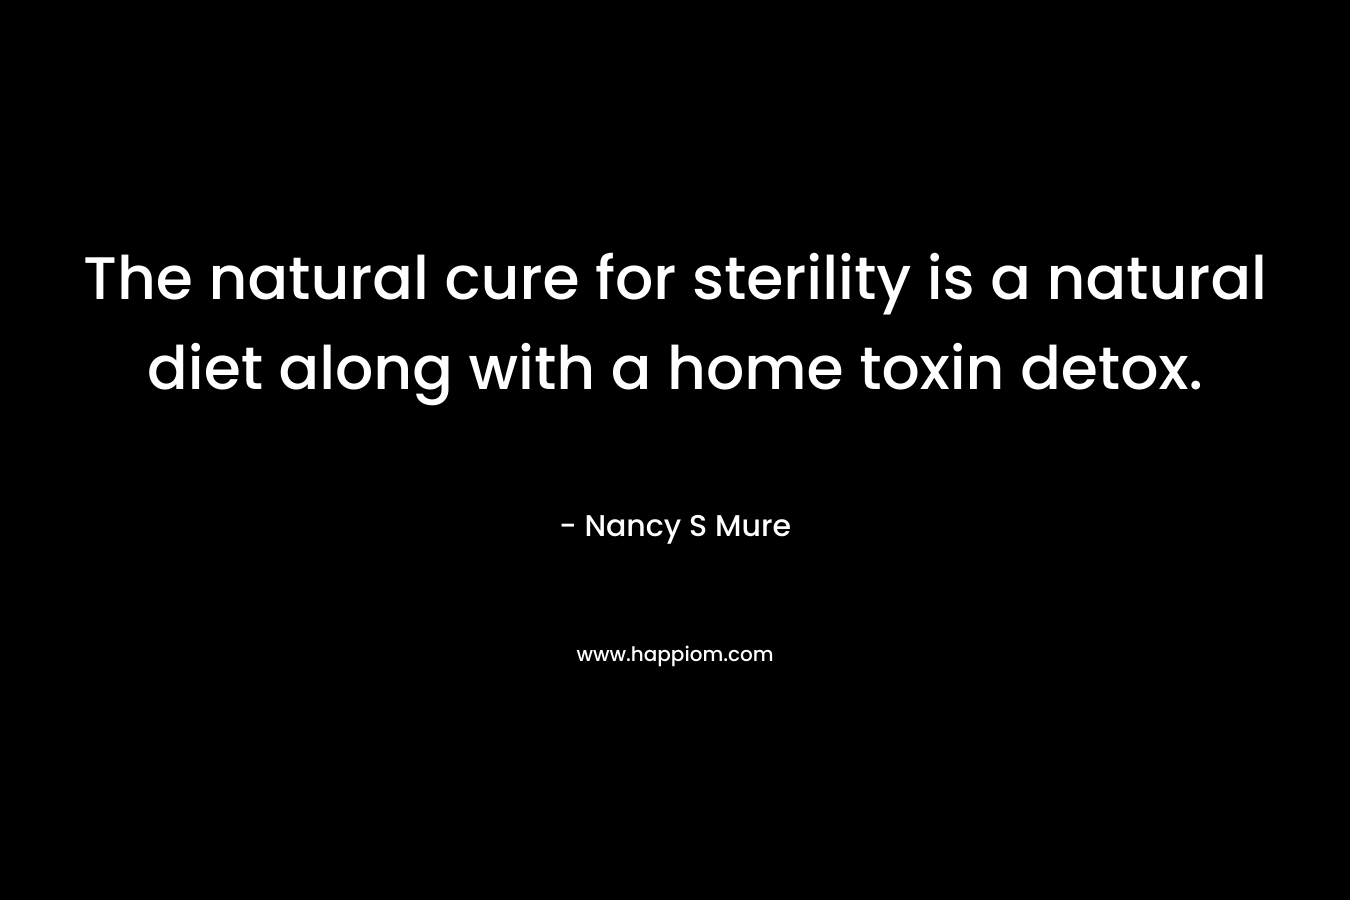 The natural cure for sterility is a natural diet along with a home toxin detox. – Nancy S Mure